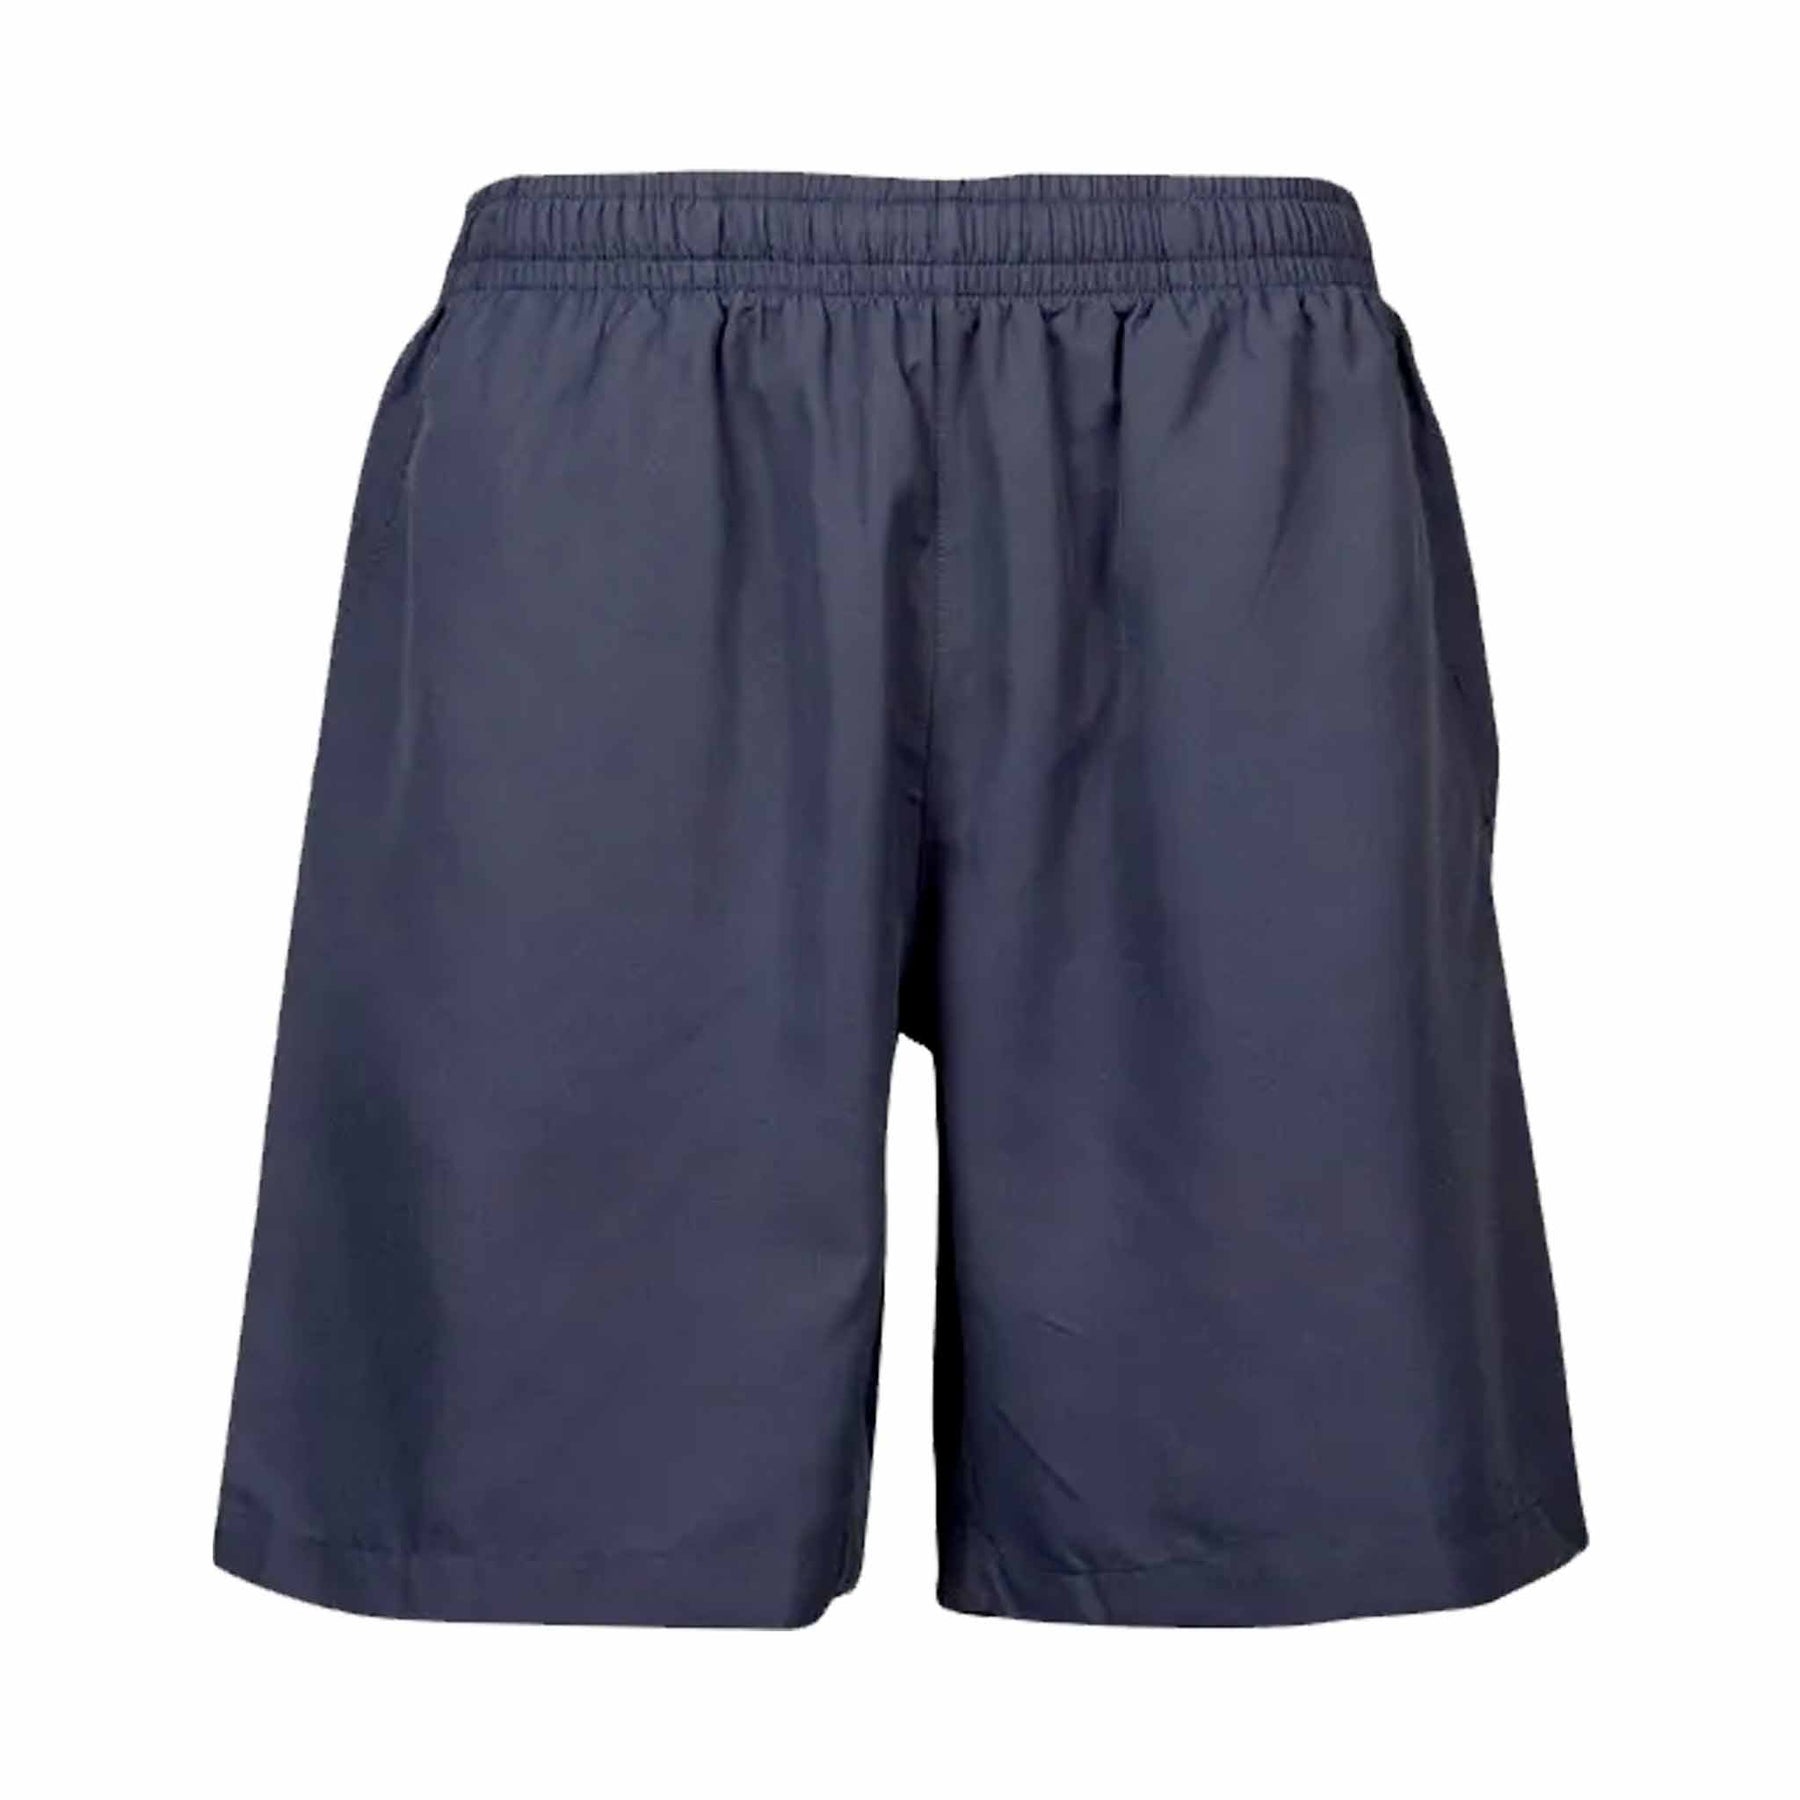 aussie pacific mens pongee shorts in navy